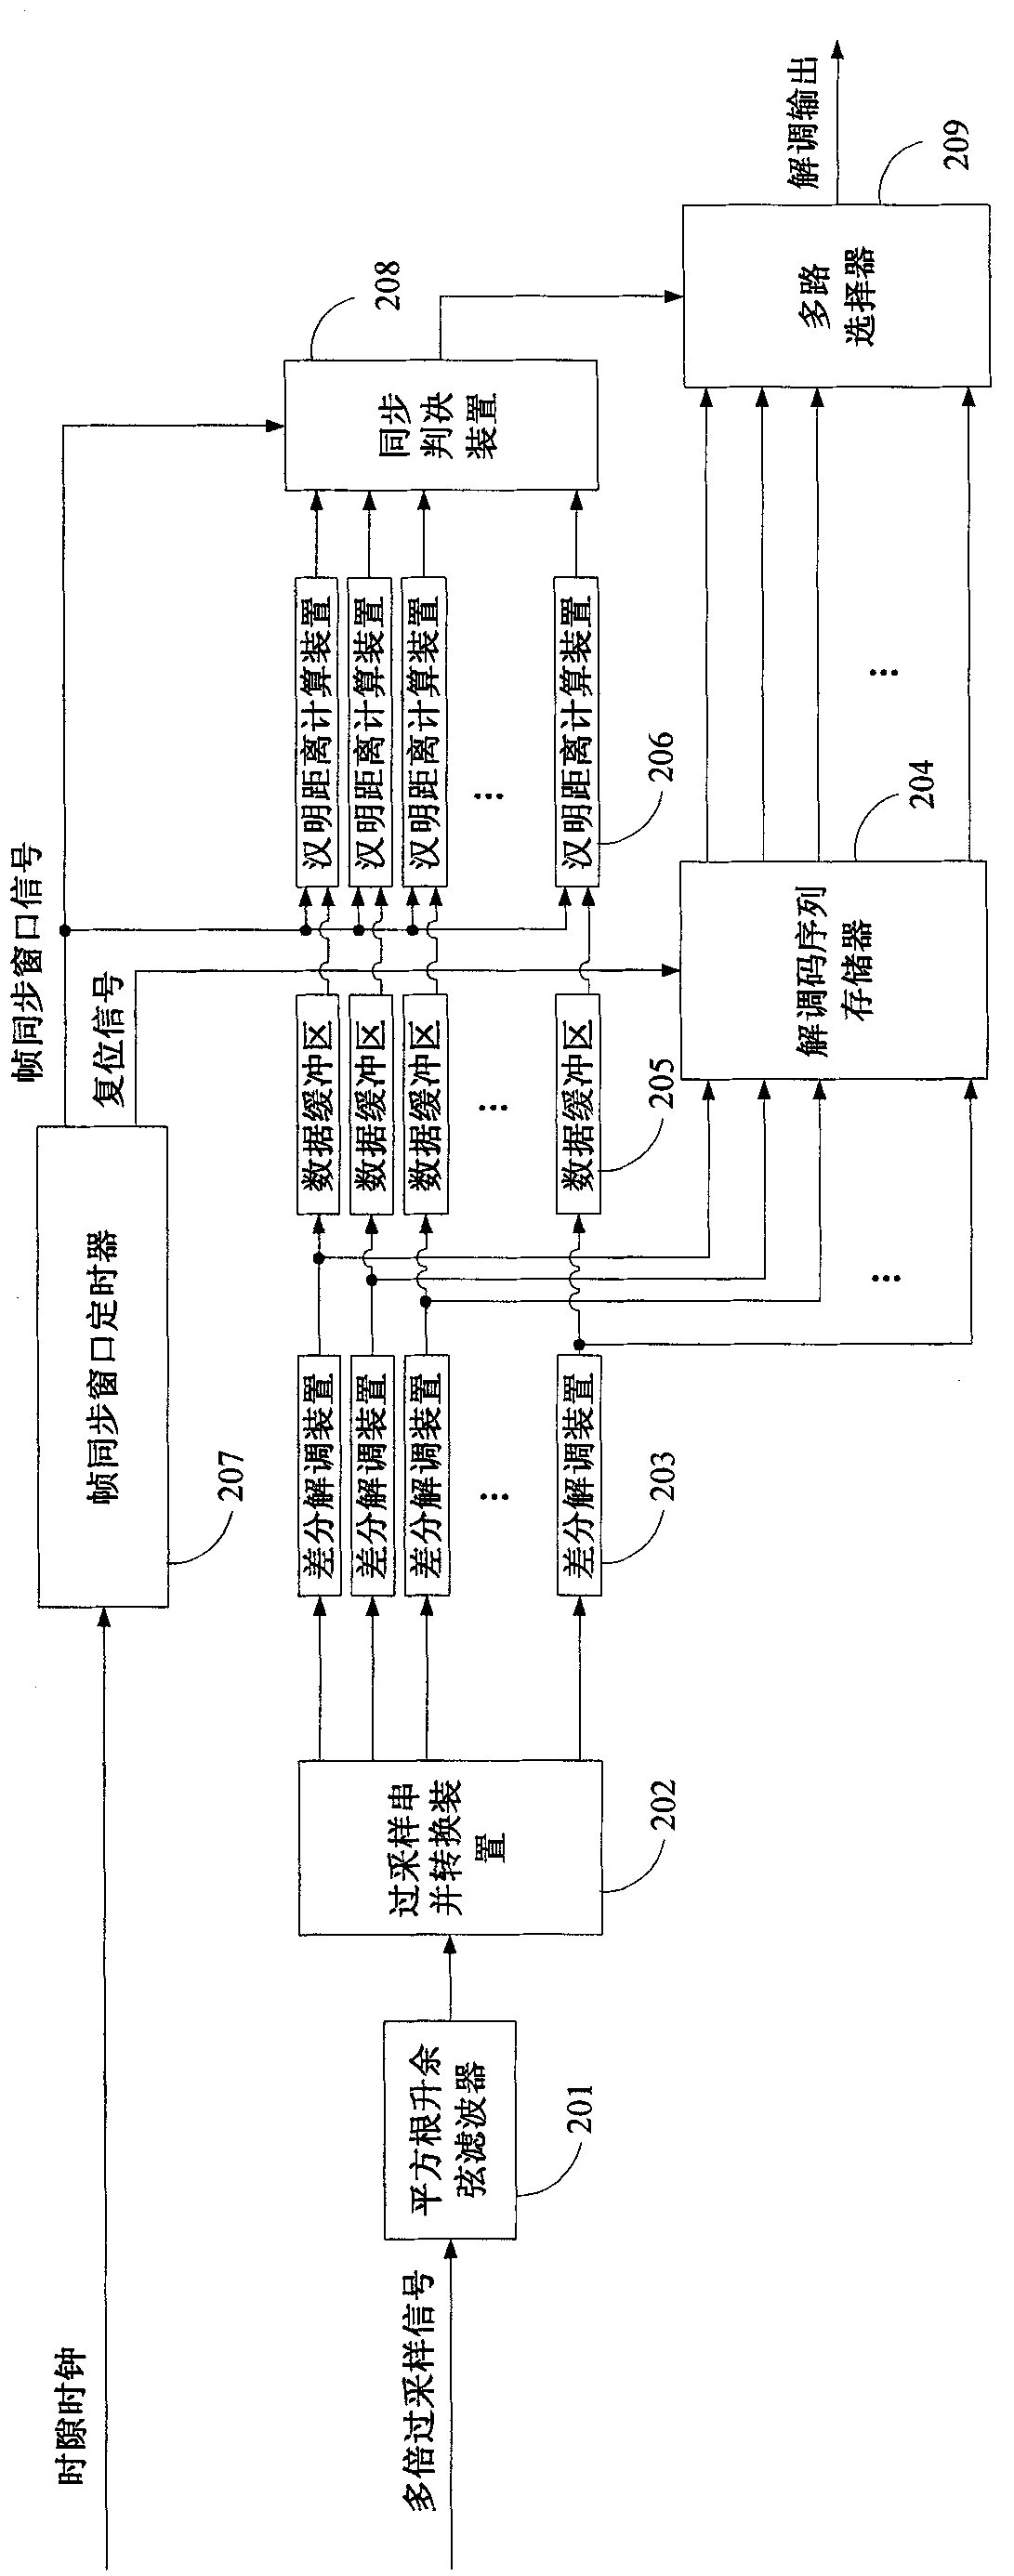 Base band receiver of base station in digital wireless trunking communication system based on TDMA (Time Division Multiple Address) technique and signal processing method thereof